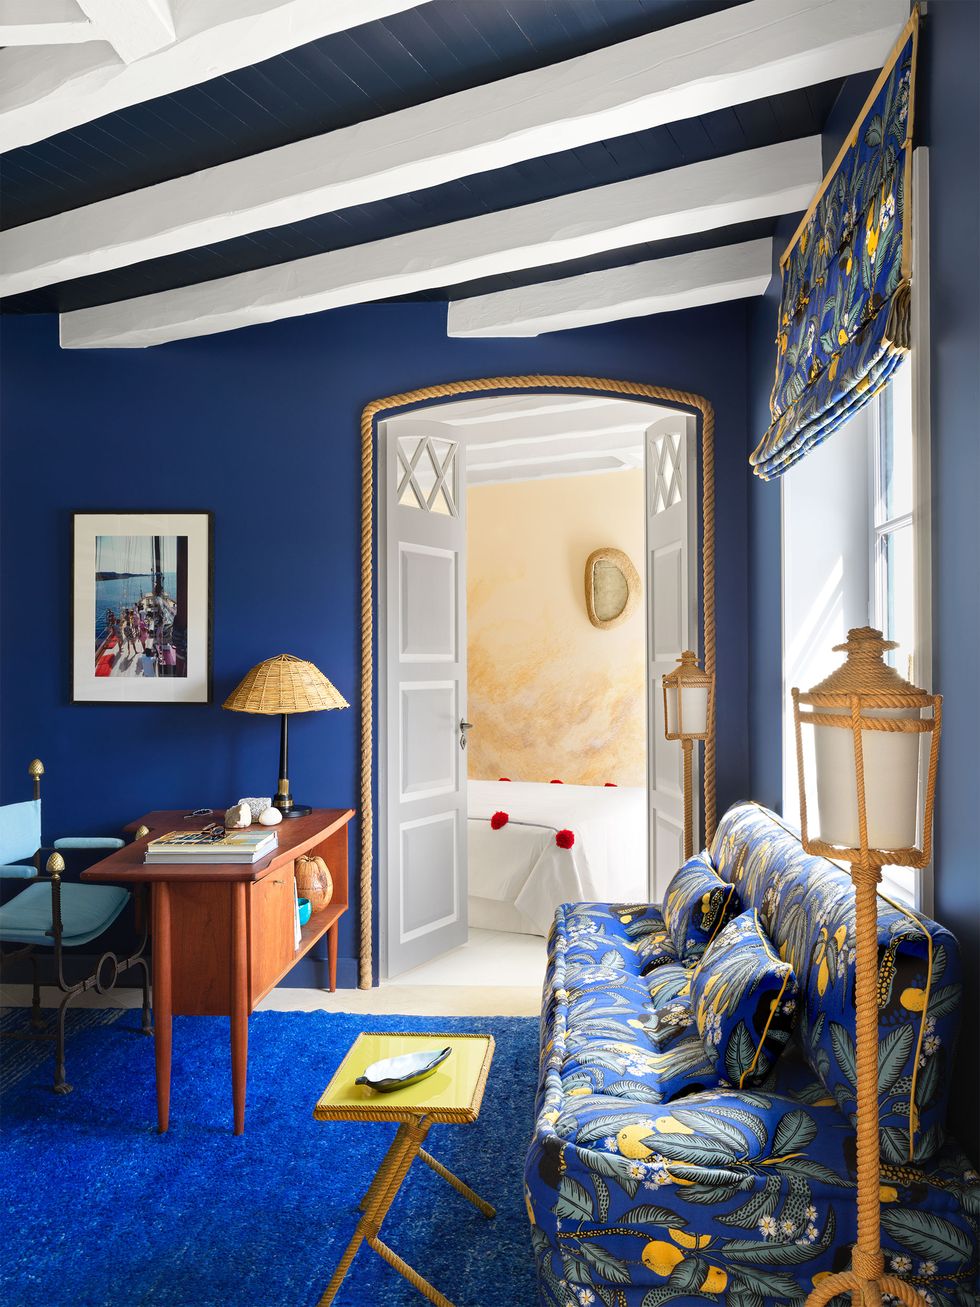 Home office with blue and yellow print sofa and matching blinds, floor lamp, wooden Scandinavian-style desk and iron chair, light blue area rug and walls painted deep blue, door leading to bedroom I have